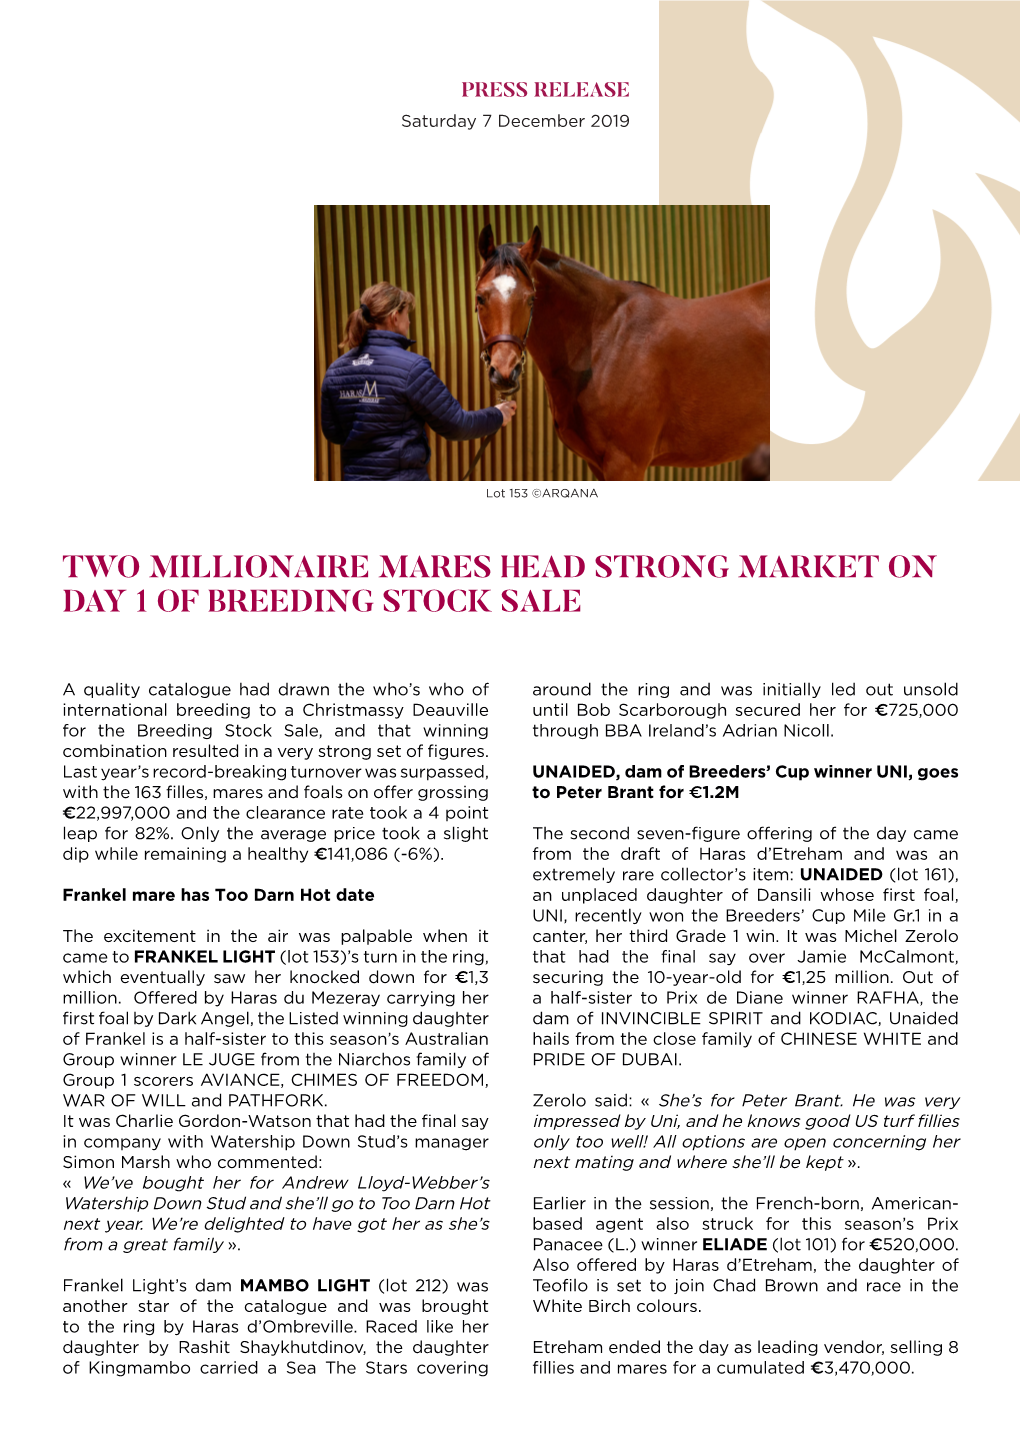 Two Millionaire Mares Head Strong Market on Day 1 of Breeding Stock Sale